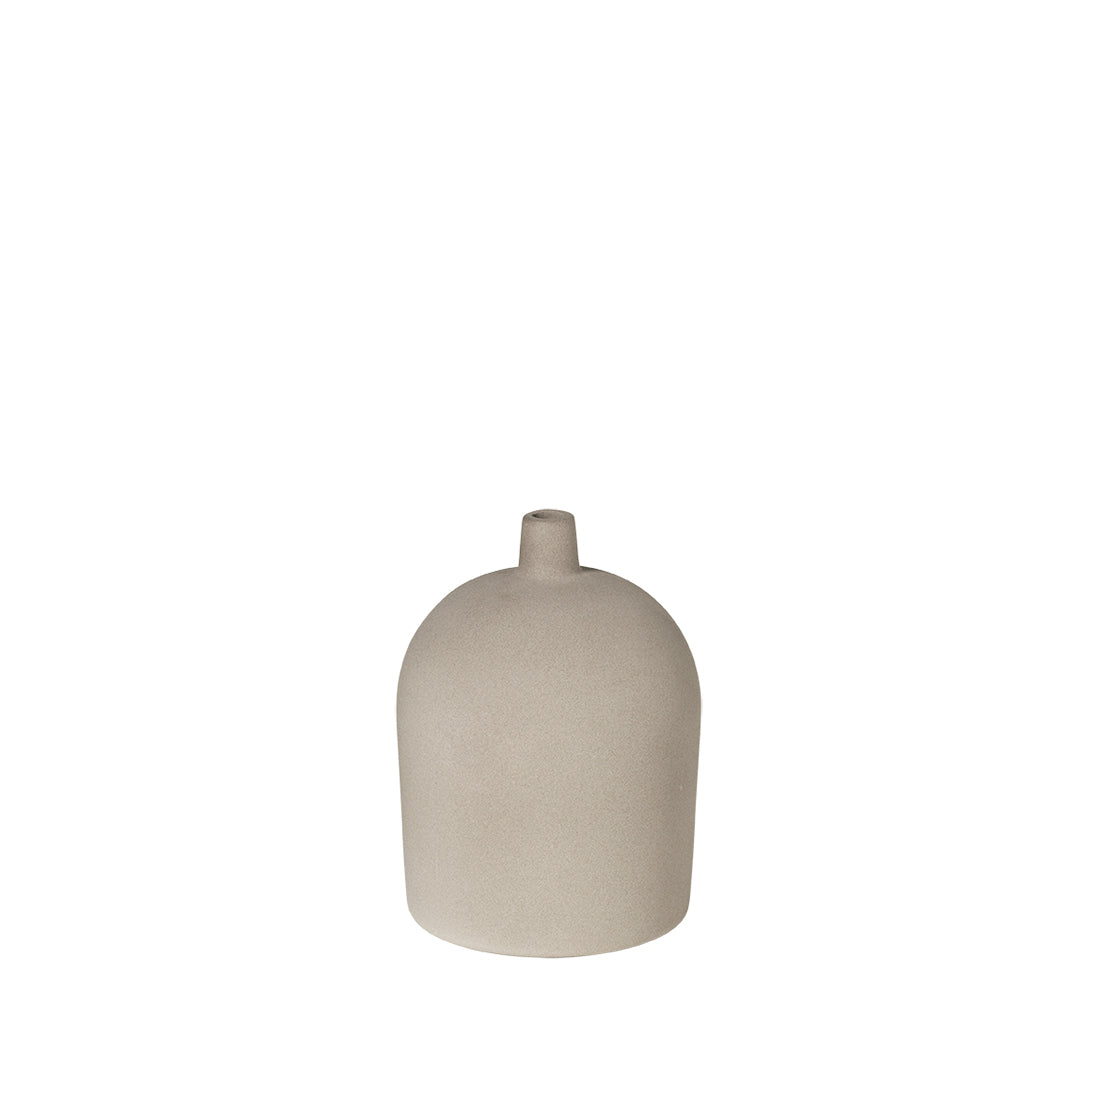 Small Dome vase made from terracotta with beautiful grey engobe